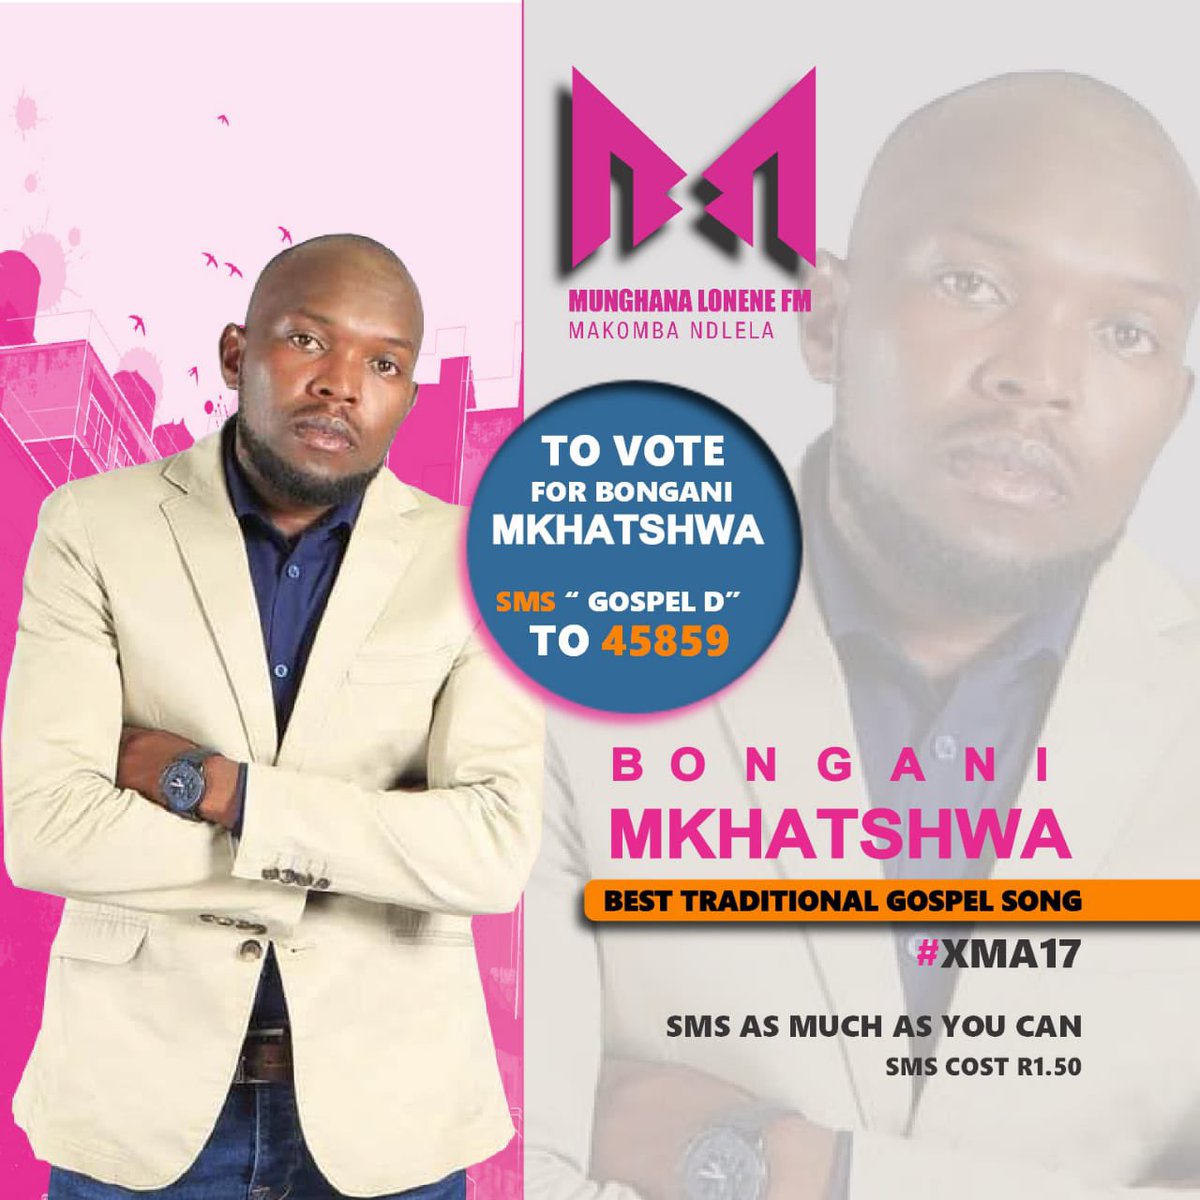 Hi family  I am nominated on MLFM XMA17.I am kindly asking for your support by just voting

To vote sms “Gospel D” to 45859

Share screenshots after voting to stand a chance to win free airtime

#ComradesMarathon2022 #SAMAs28